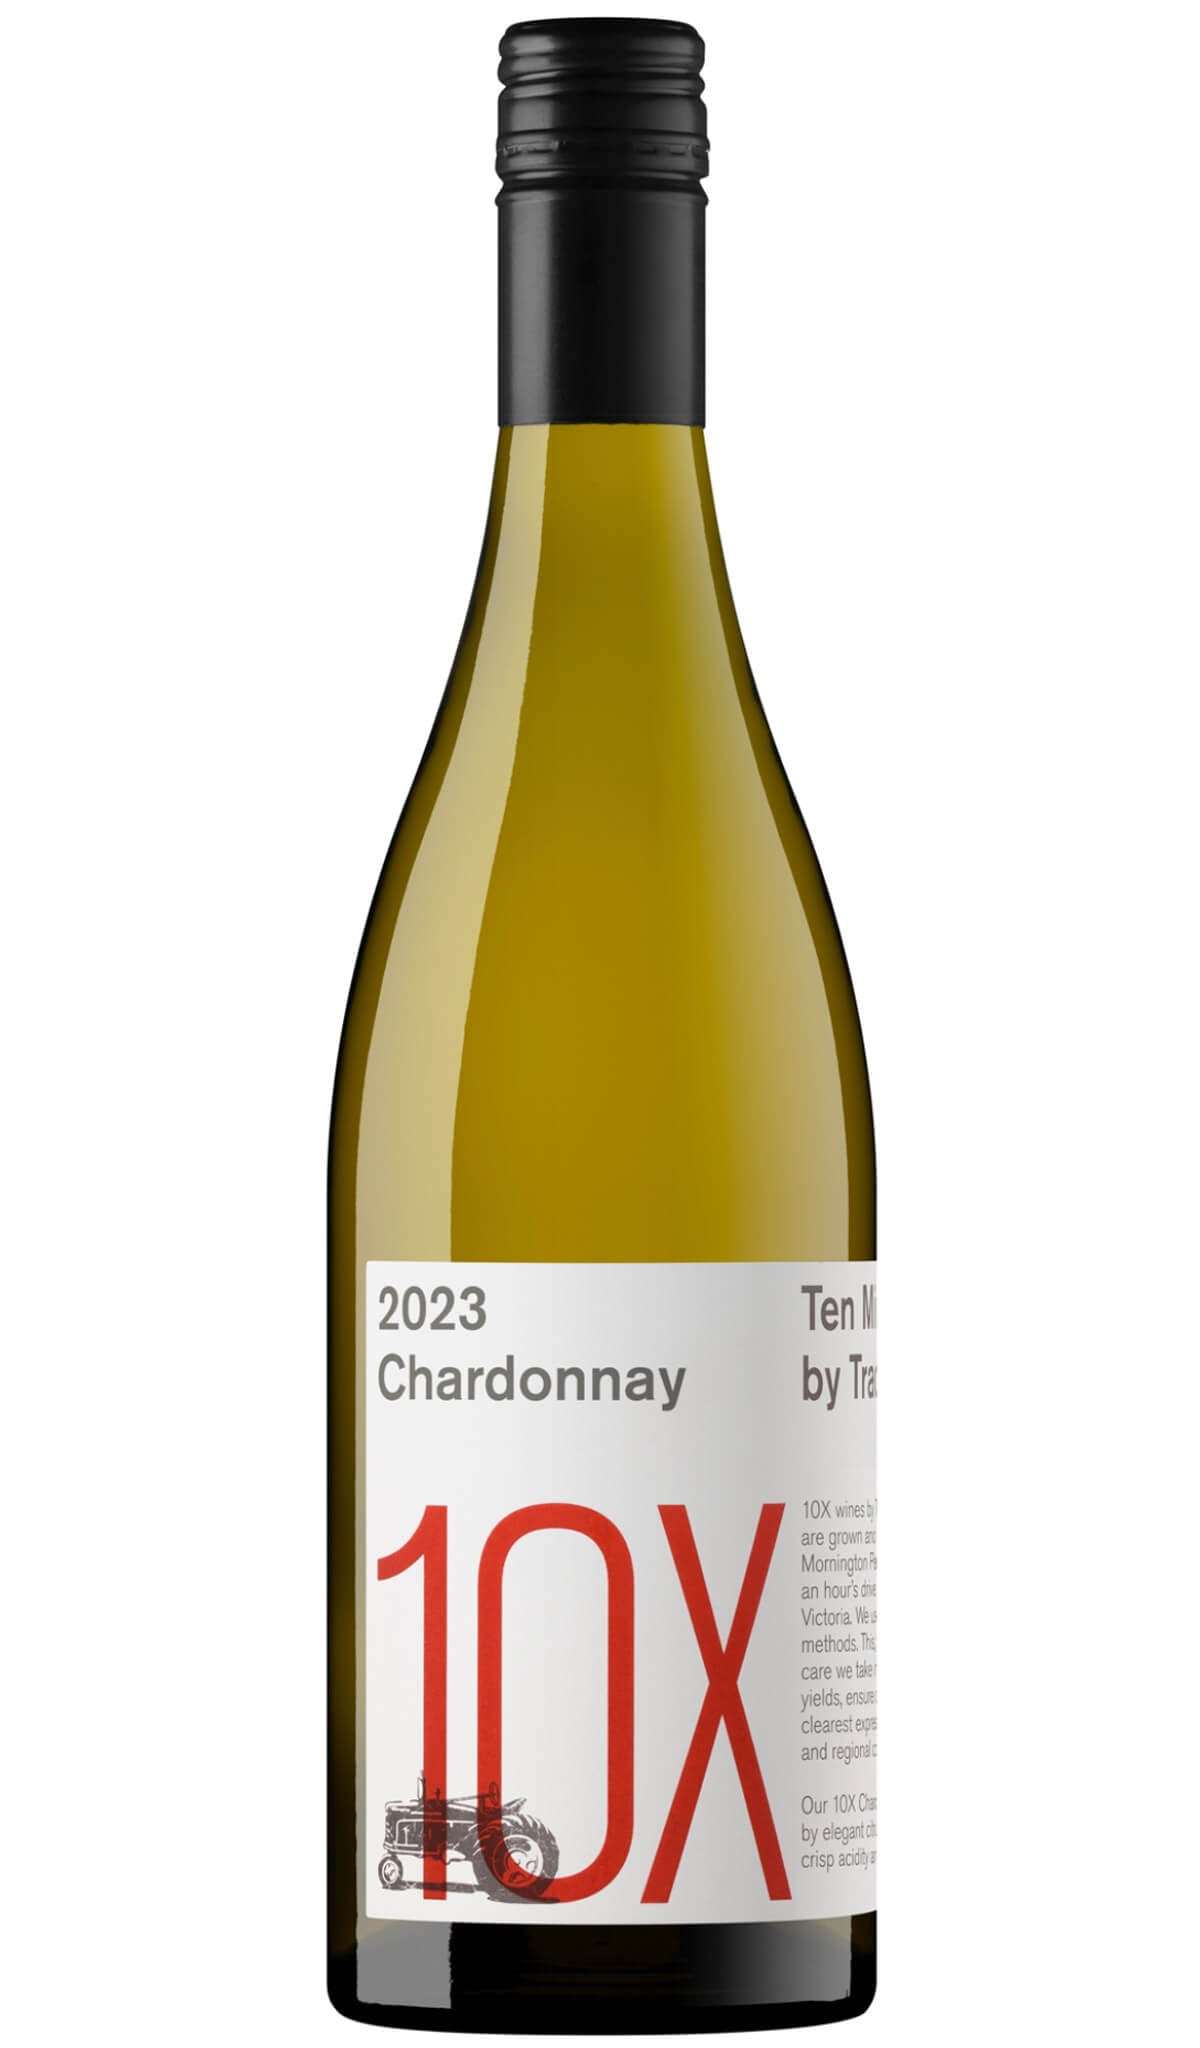 Find out more or buy Ten Minutes by Tractor 10X Chardonnay 2023 (Mornington Peninsula) online at Wine Sellers Direct - Australia’s independent liquor specialists.